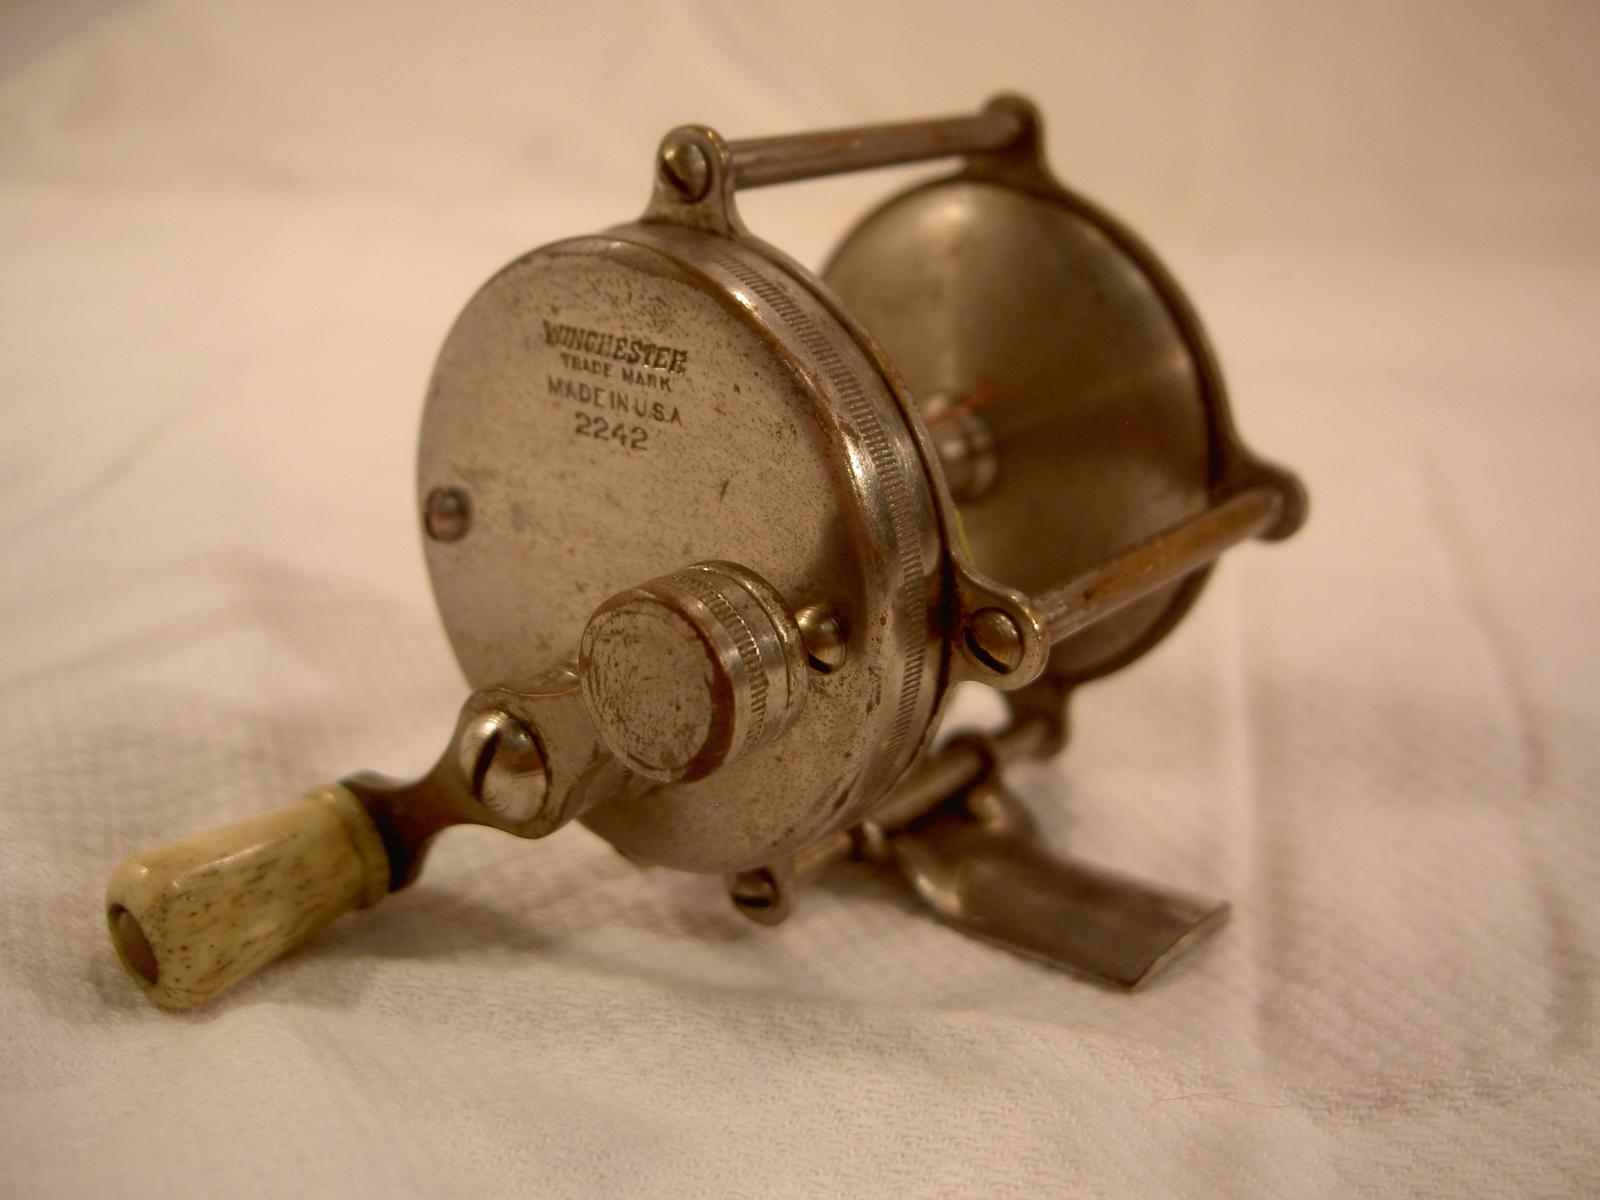 ANTIQUE OLD FISHING REEL WINCHESTER 2242 1920'S